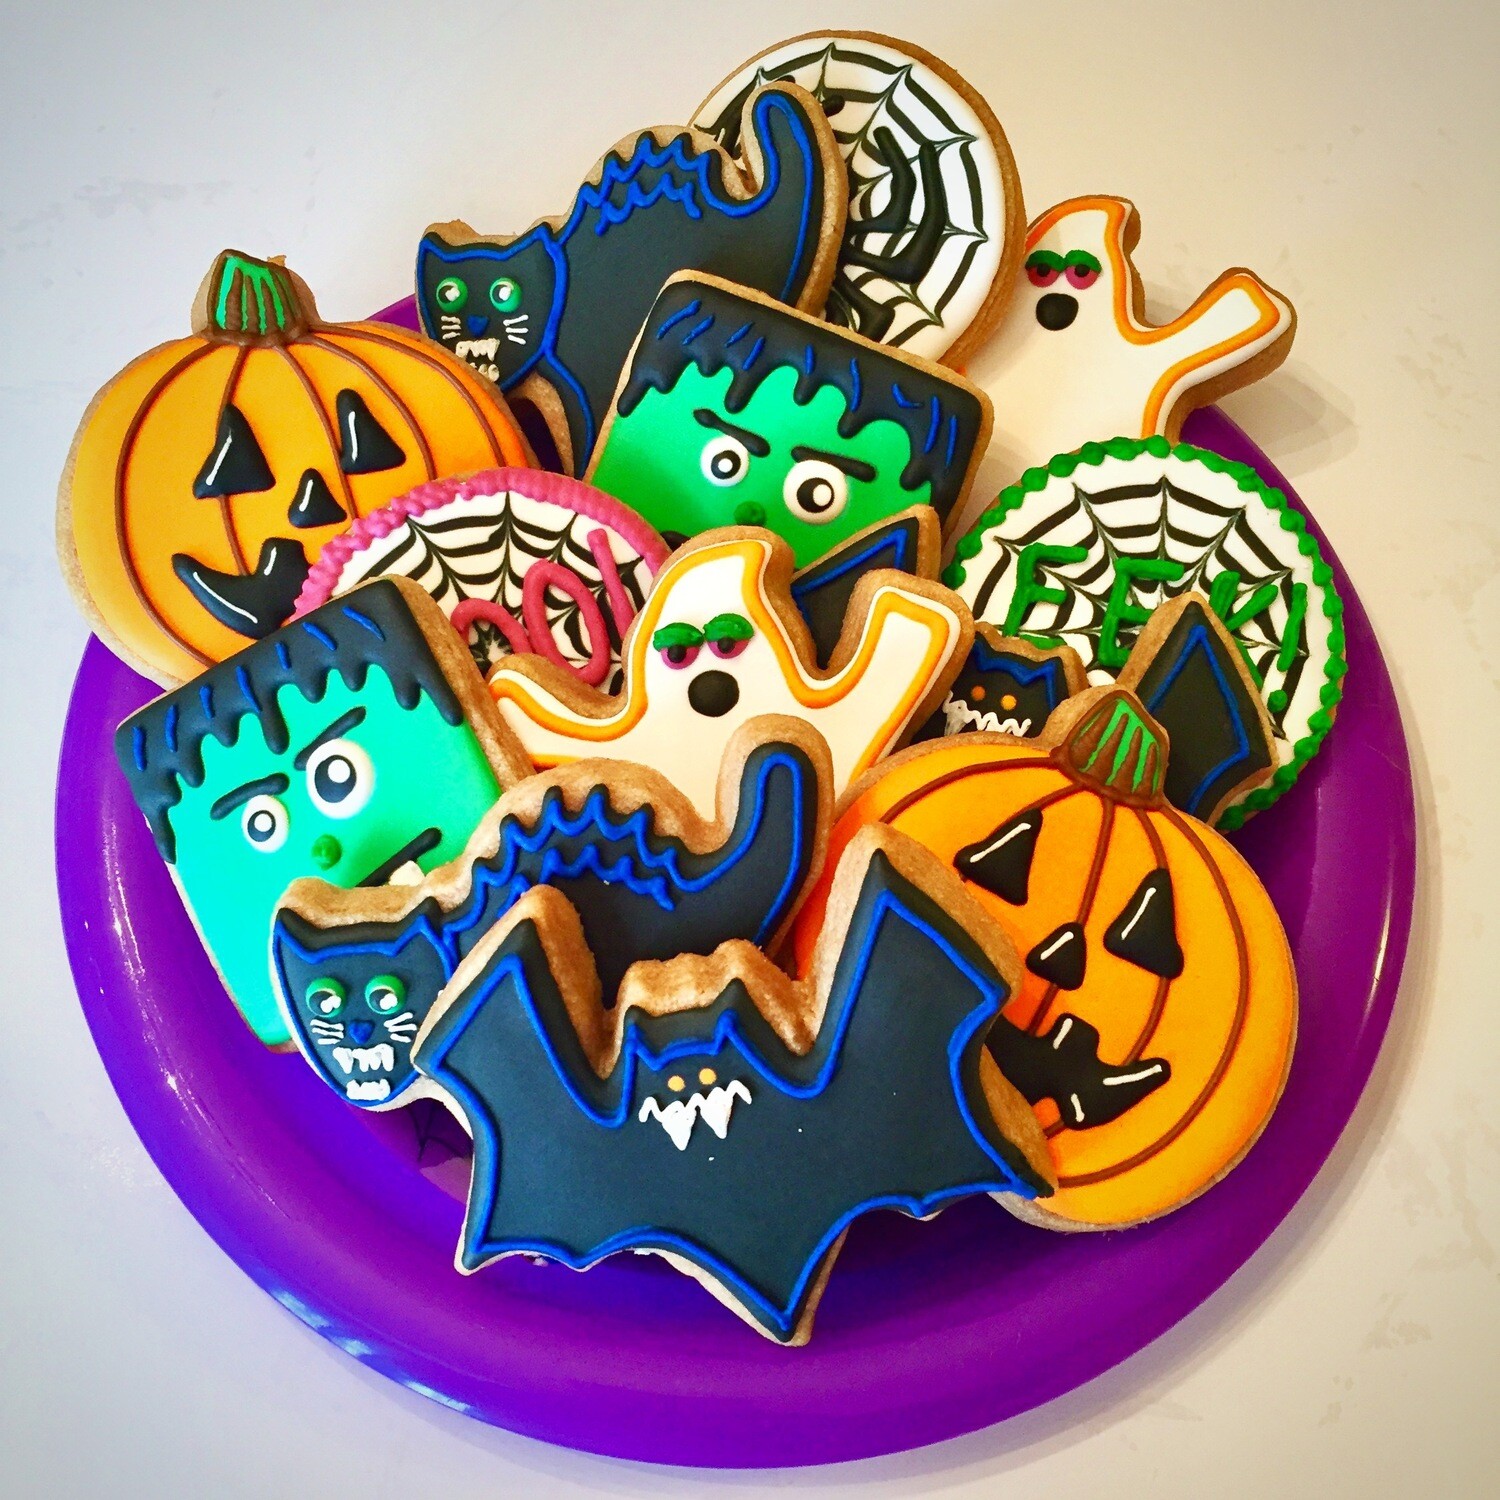 'Halloween Decorating Workshop - SUNDAY, OCTOBER 18th at 4 p.m. (THE COOKIE DECORATING STUDIO)